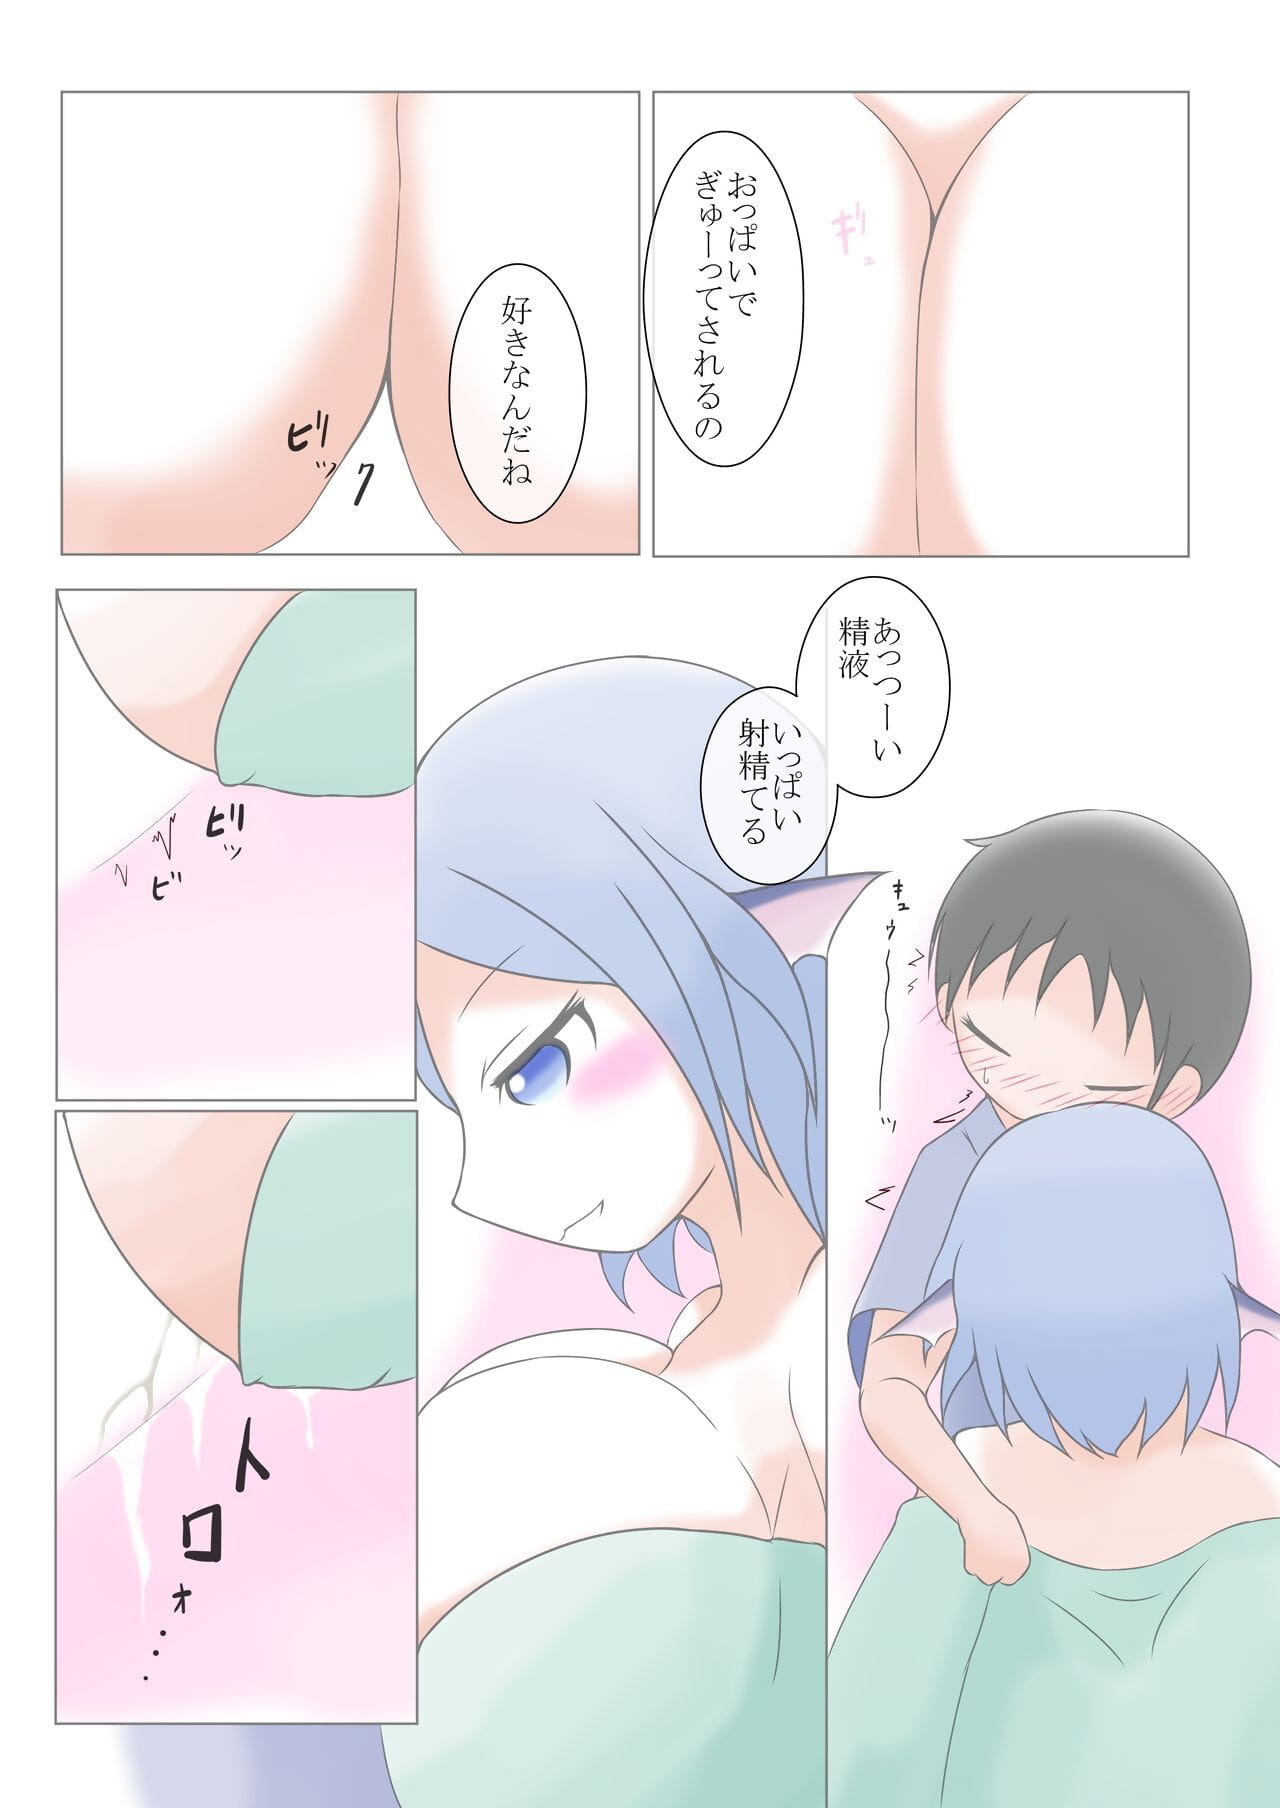 wakasagihime ดี page 1